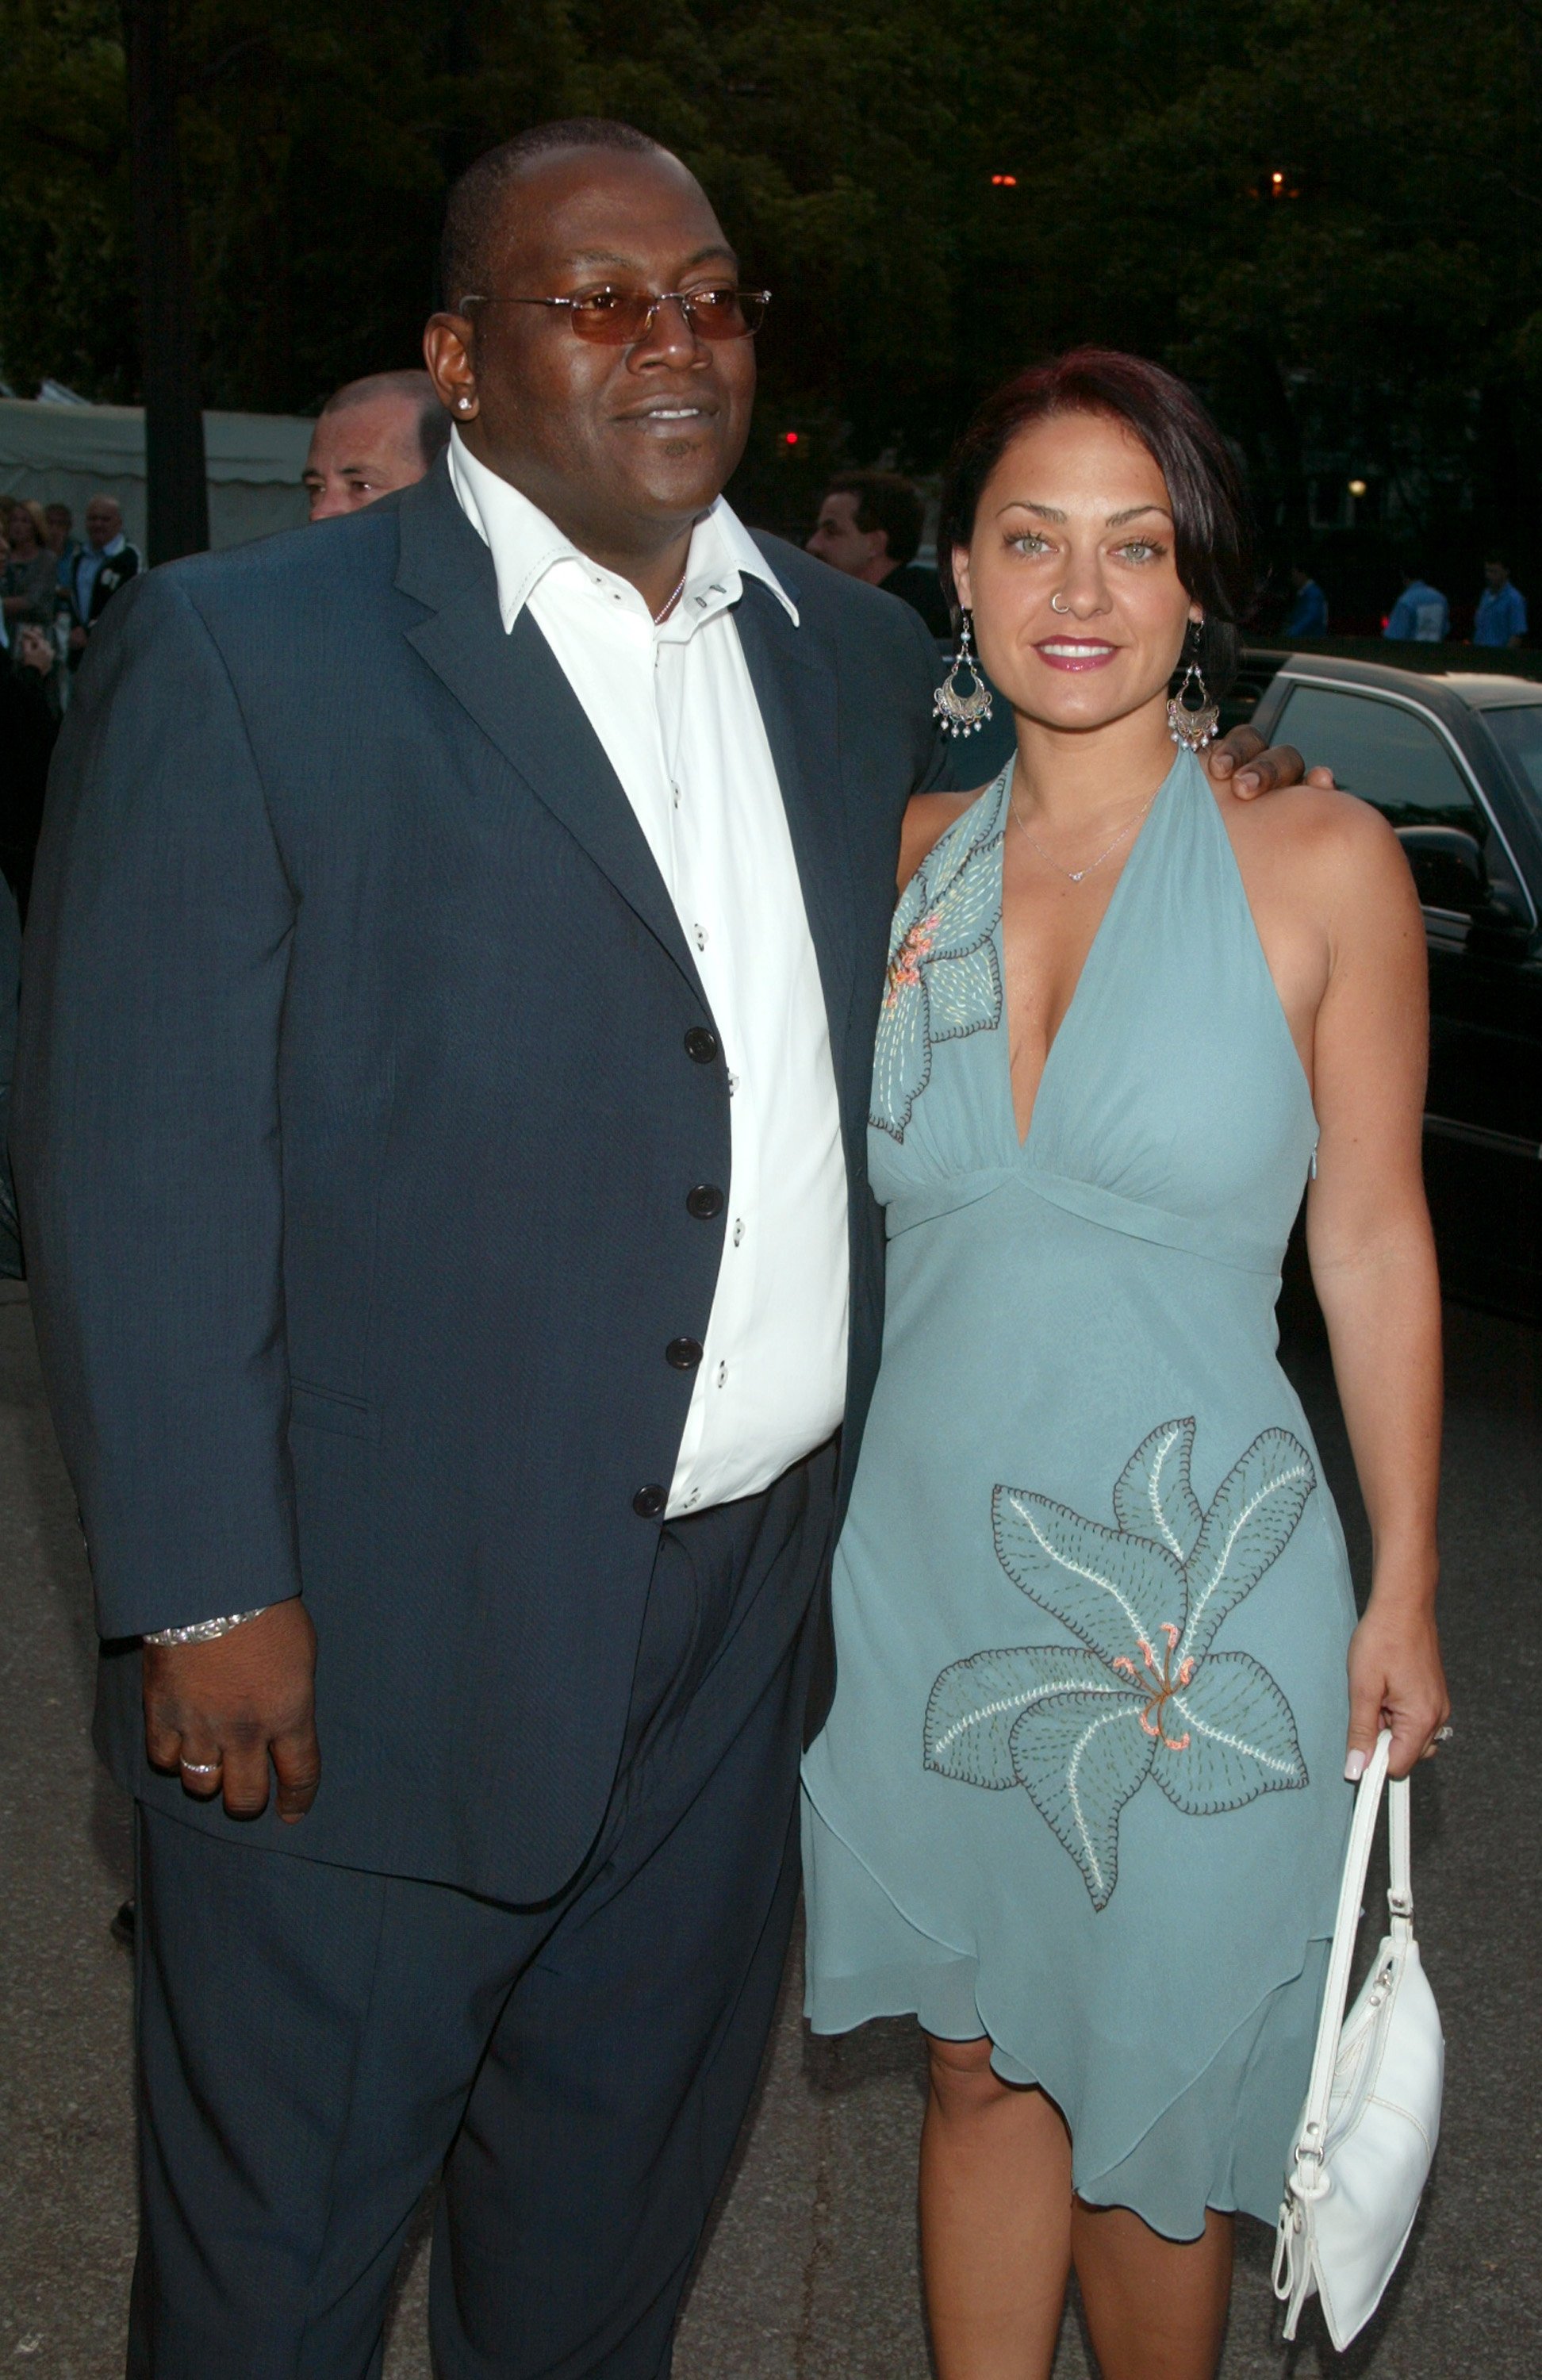 Musician Randy Jackson pictured with his wife Erica during The Fresh Air Fund Salute To American Heroes at Tavern On the Green in New York City, New York. | Source: Getty Images